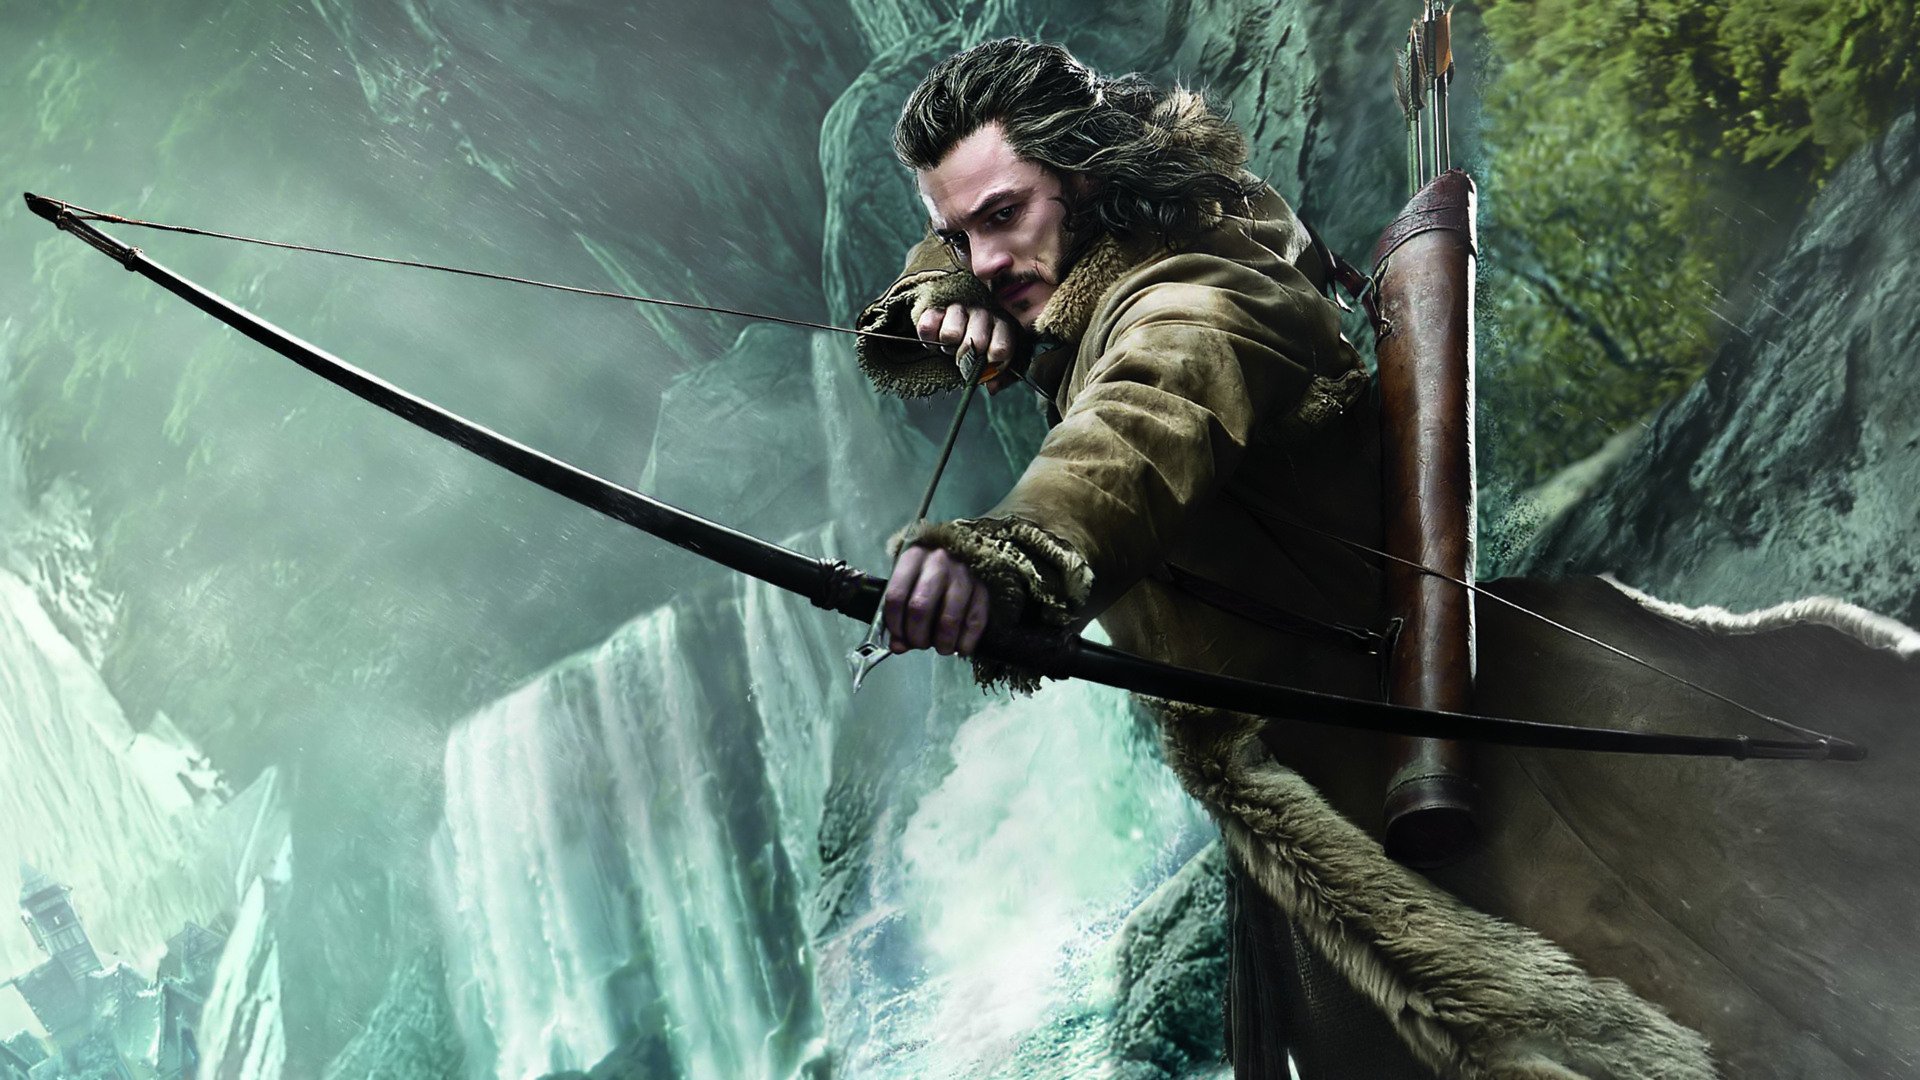 for apple download The Hobbit: The Desolation of Smaug